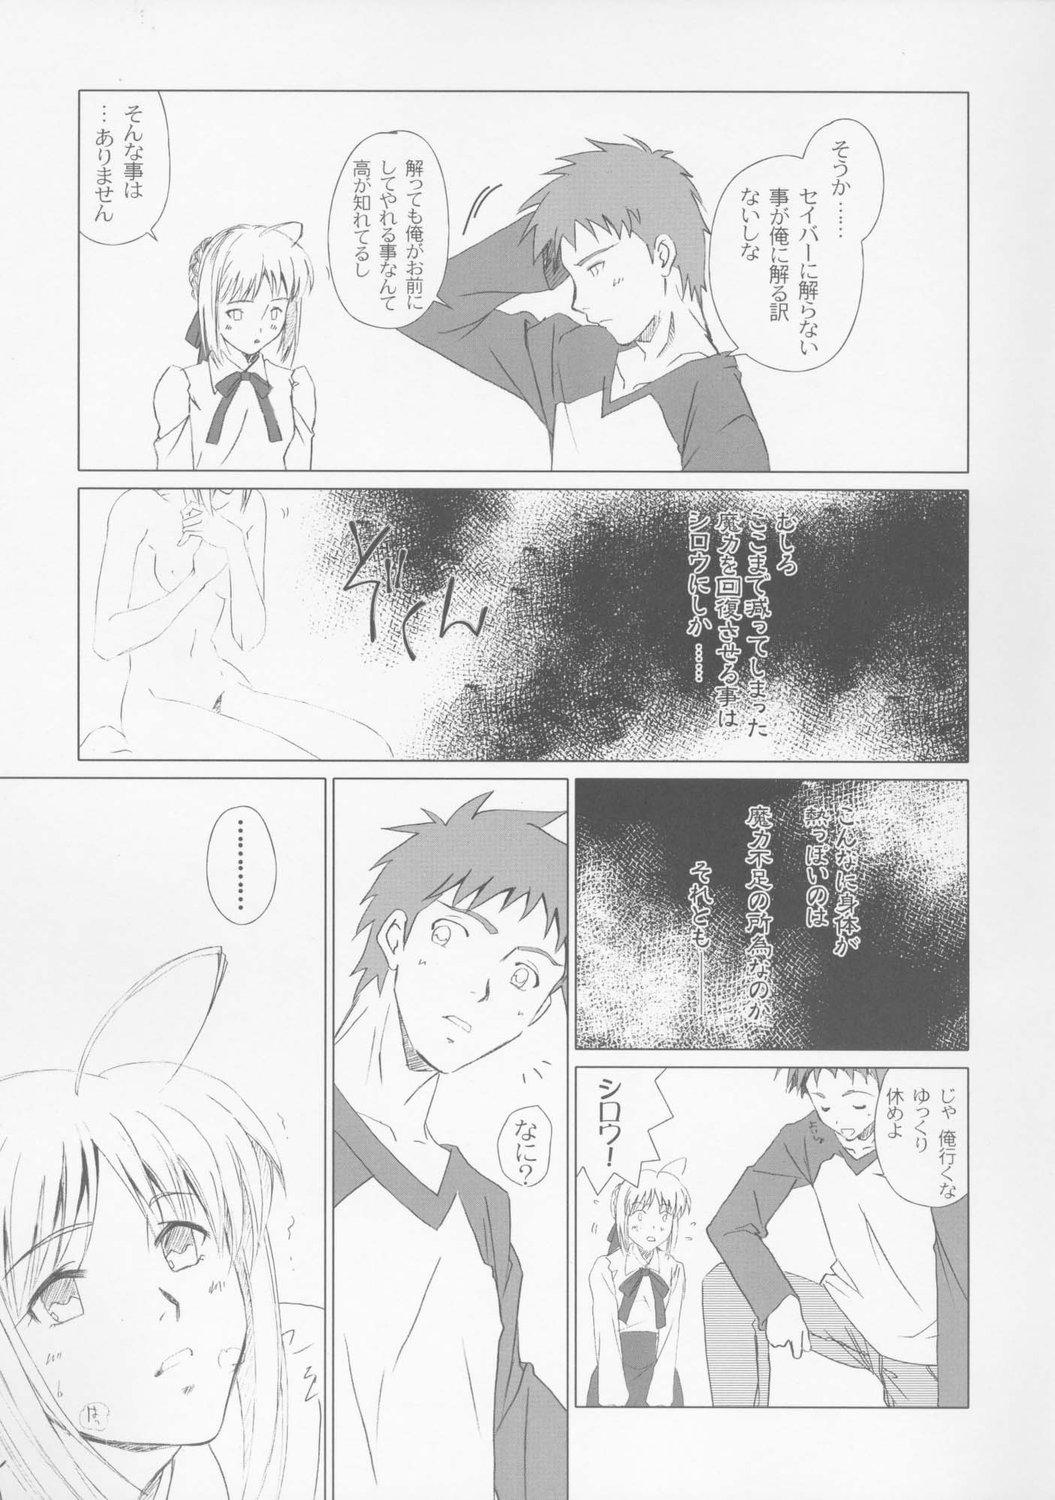 Handsome Eien no Uta - Ever Song - Fate stay night Fate hollow ataraxia Close Up - Page 11